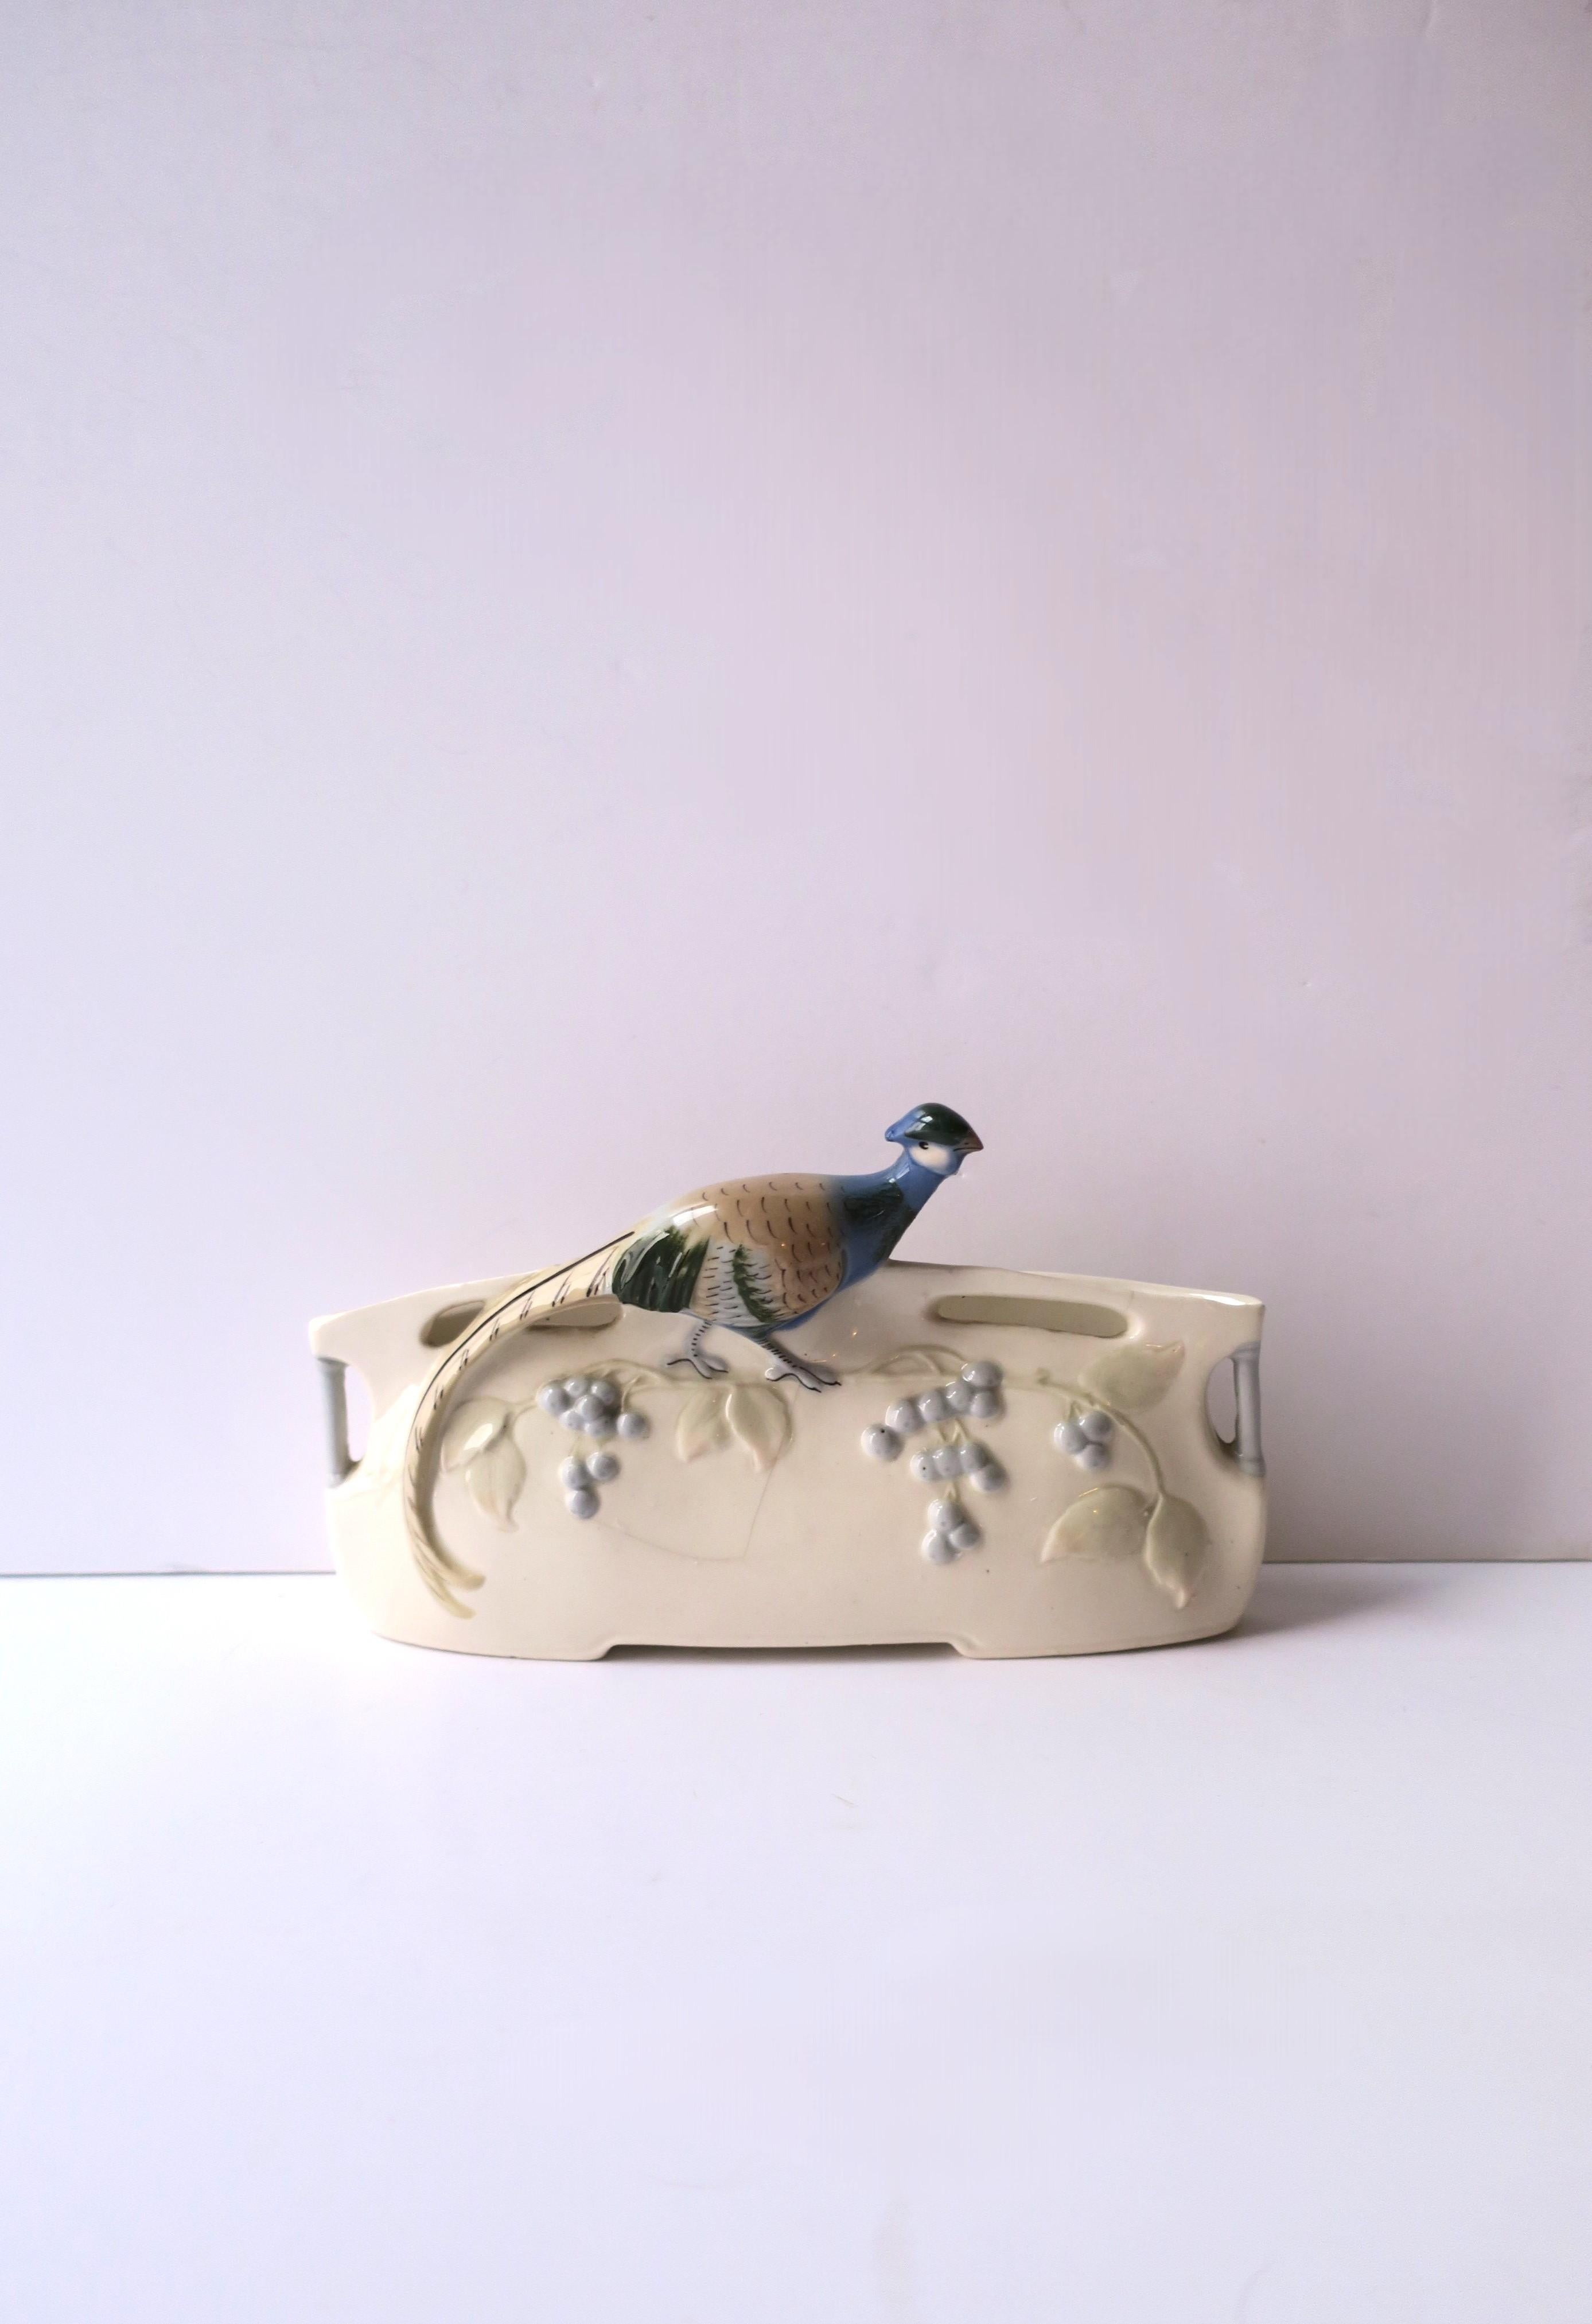 A desk letter or mail holder with a peacock or pheasant bird design, in the Art Nouveau design style, circa early to mid-20th century. A desk letter mail holder with beautiful bird design. Dimensions: 2.25